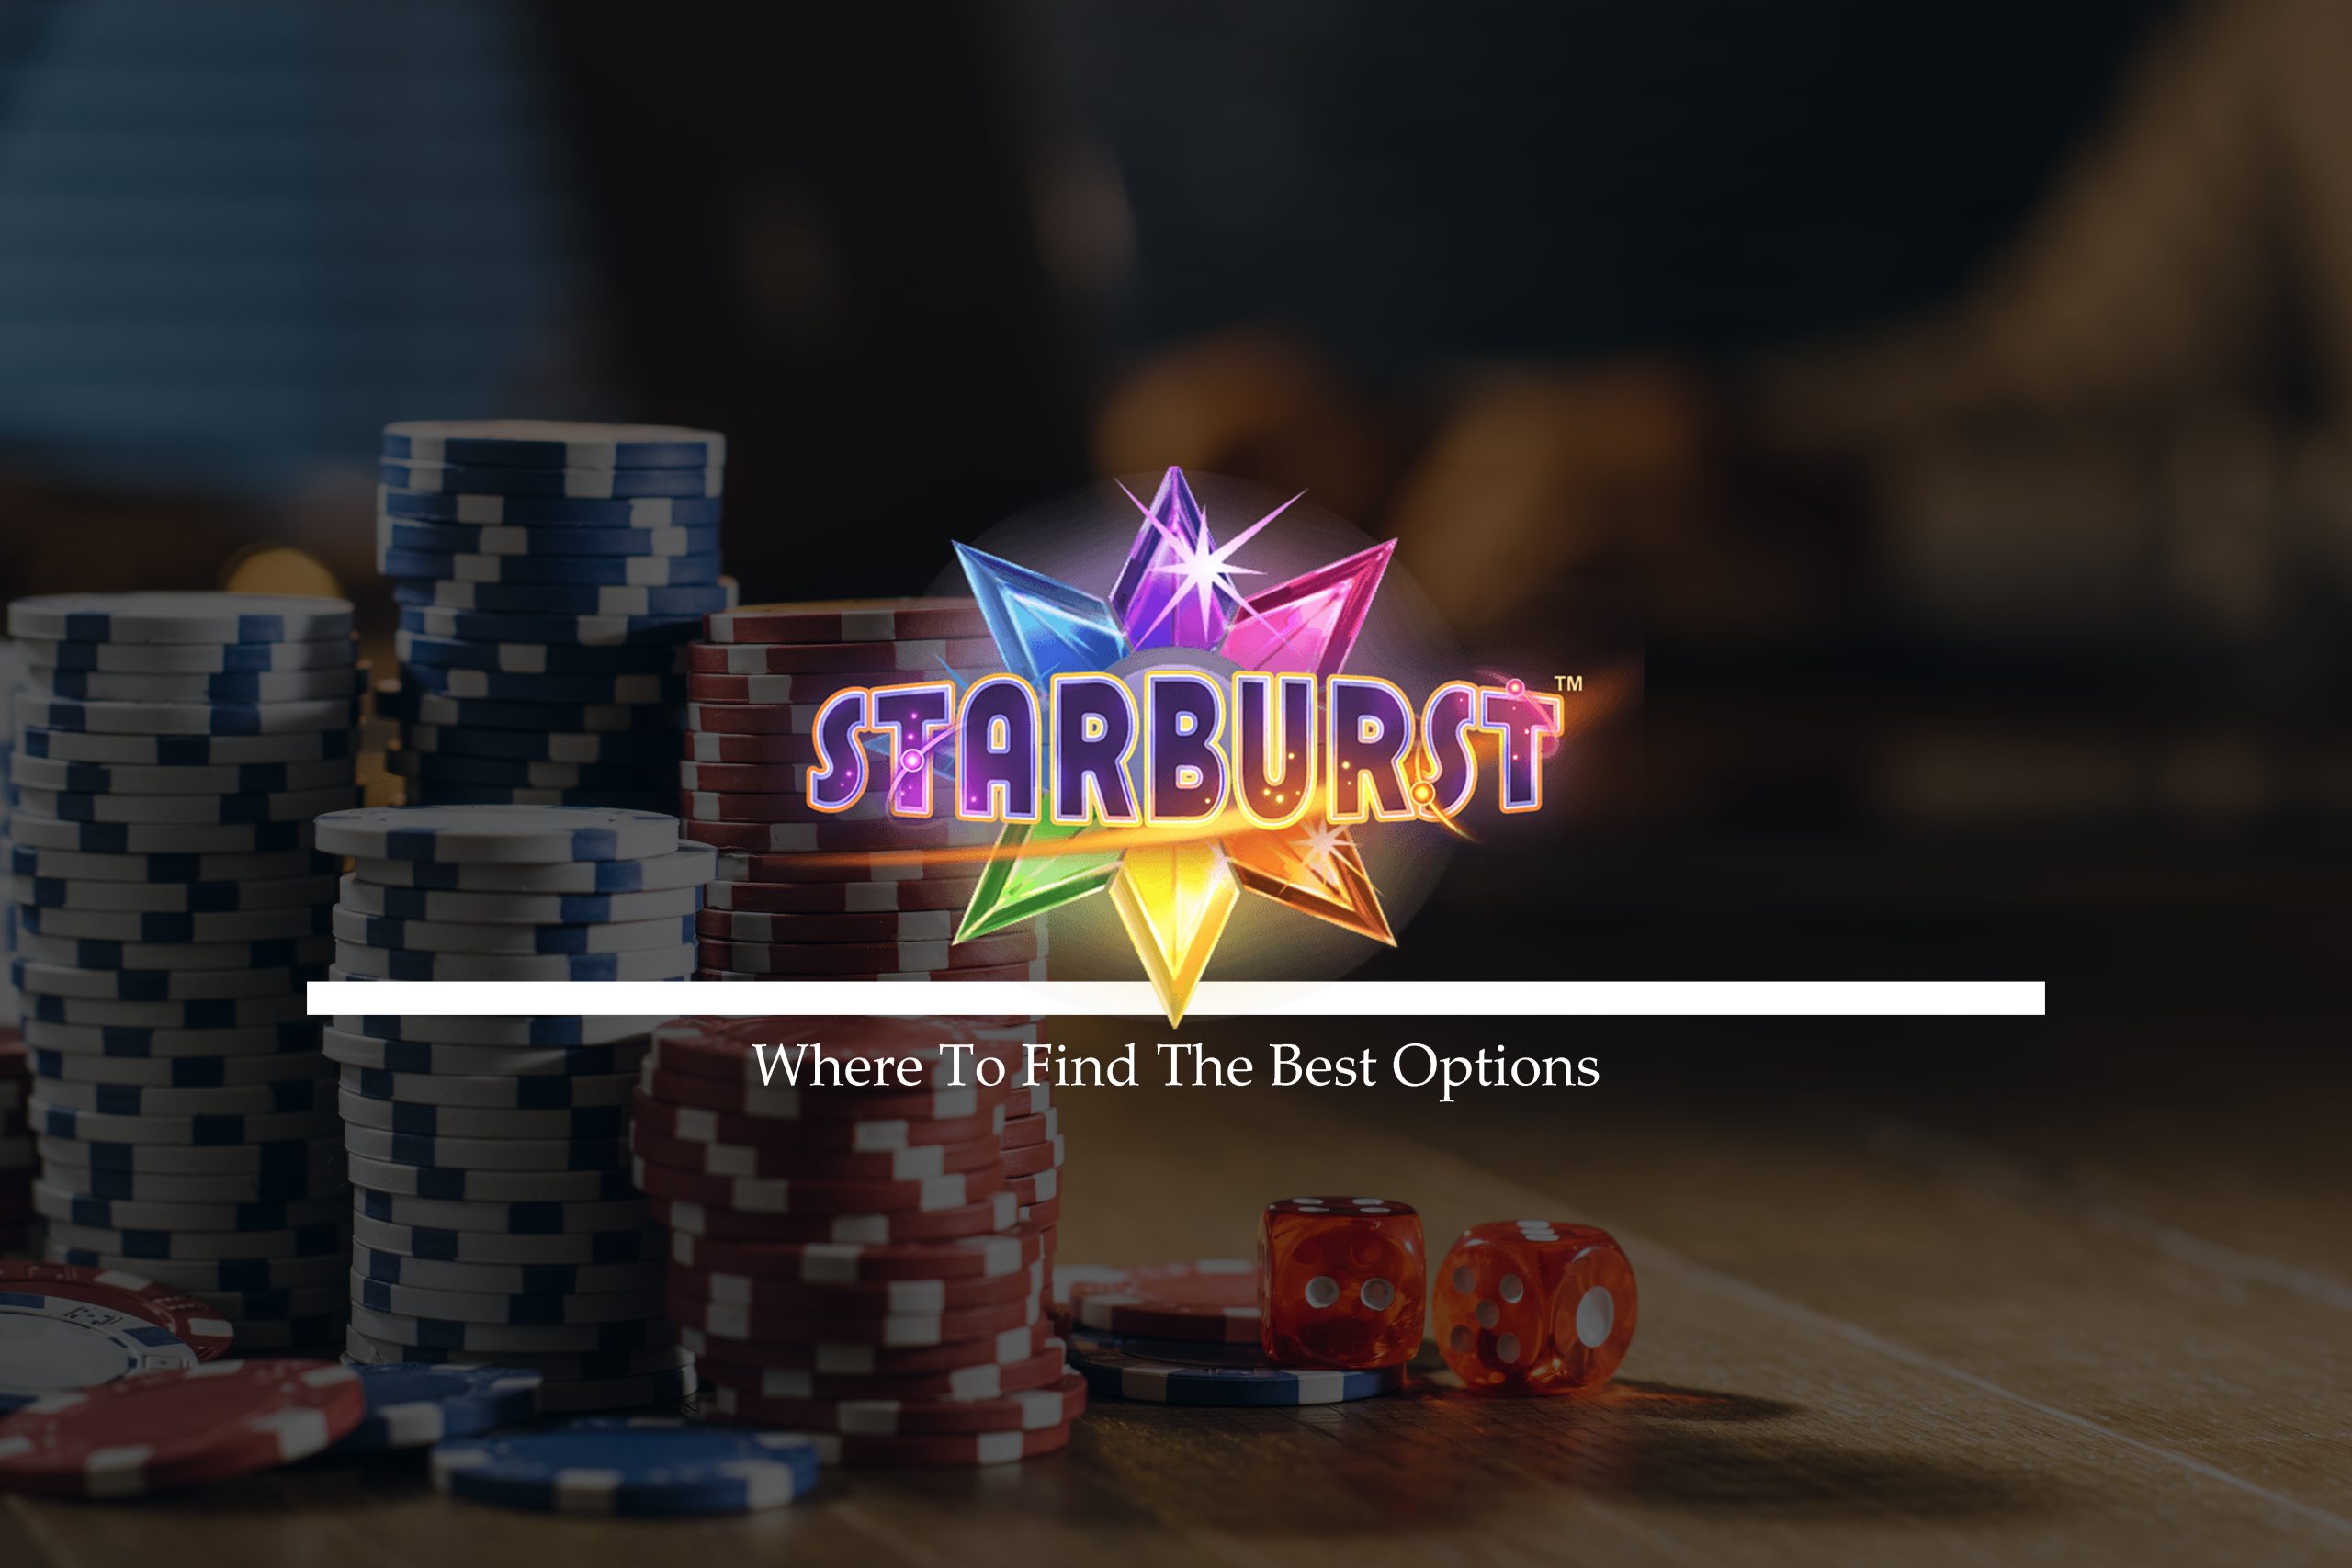 Starburst Slot Not On Gamstop: Where To Find The Best Options